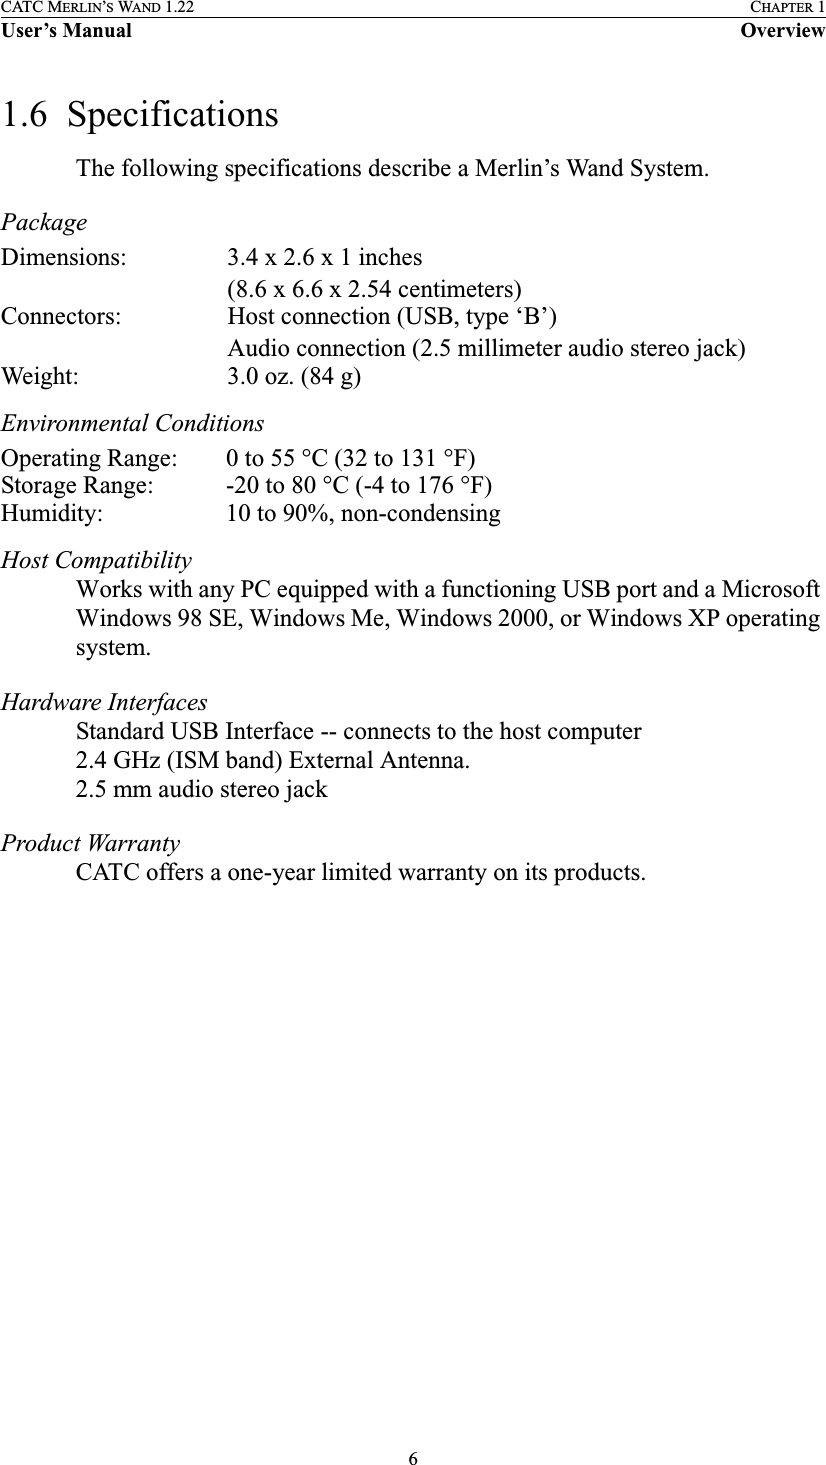 6CATC MERLIN’S WAND 1.22 CHAPTER 1User’s Manual Overview1.6  SpecificationsThe following specifications describe a Merlin’s Wand System. PackageEnvironmental Conditions Host CompatibilityWorks with any PC equipped with a functioning USB port and a Microsoft Windows 98 SE, Windows Me, Windows 2000, or Windows XP operating system.Hardware Interfaces Standard USB Interface -- connects to the host computer2.4 GHz (ISM band) External Antenna.2.5 mm audio stereo jackProduct Warranty CATC offers a one-year limited warranty on its products.Dimensions: 3.4 x 2.6 x 1 inches(8.6 x 6.6 x 2.54 centimeters)Connectors: Host connection (USB, type ‘B’)Audio connection (2.5 millimeter audio stereo jack)Weight: 3.0 oz. (84 g)Operating Range: 0 to 55 °C (32 to 131 °F)Storage Range: -20 to 80 °C (-4 to 176 °F)Humidity: 10 to 90%, non-condensing